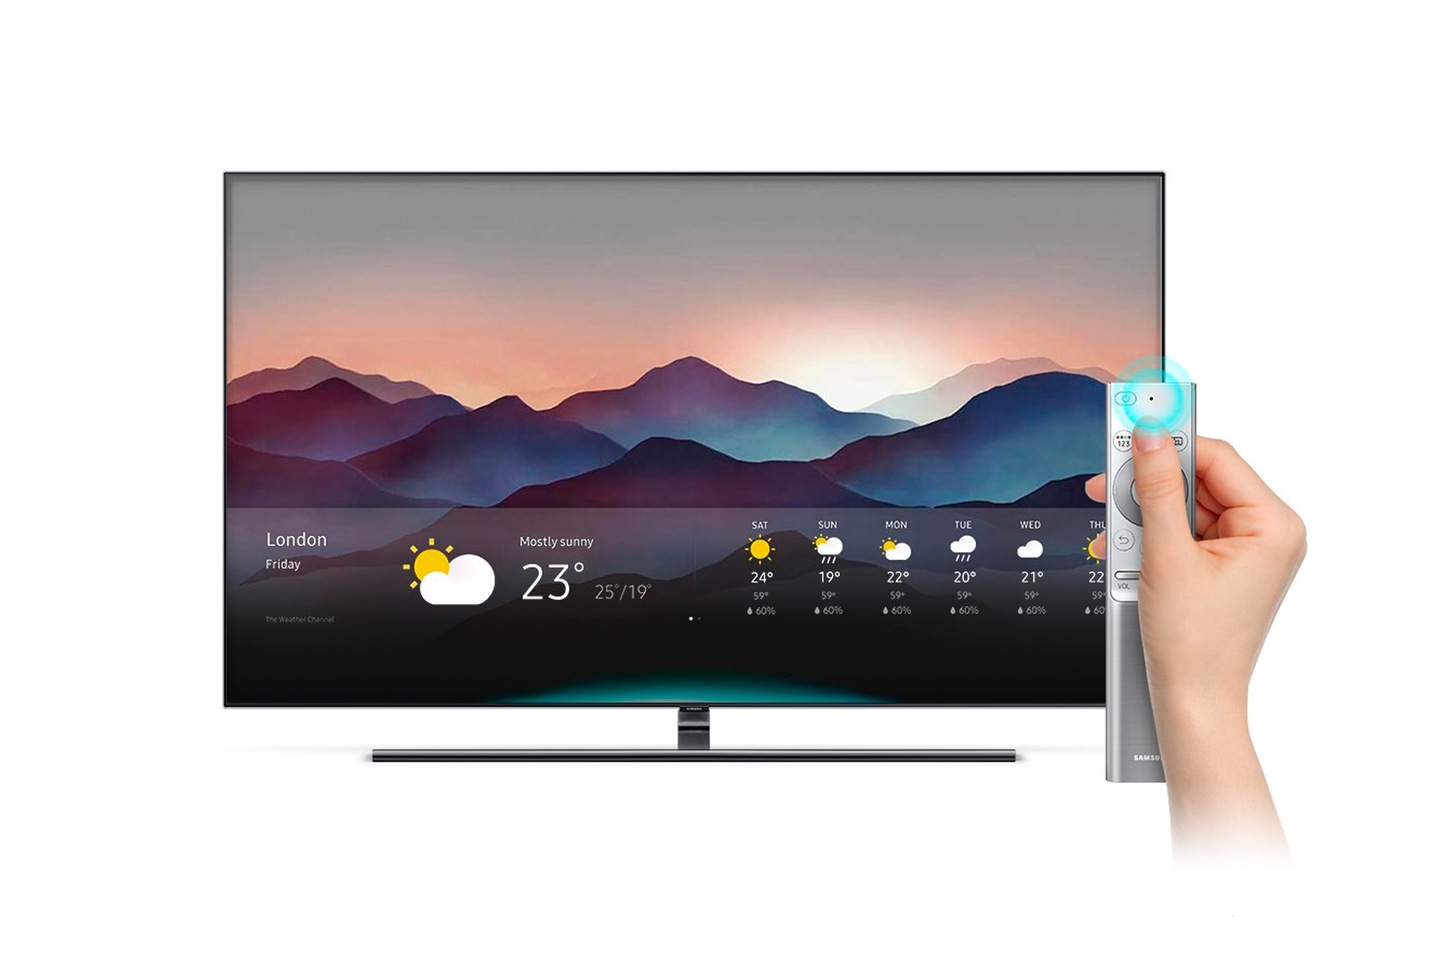 Voice Assistant on TV